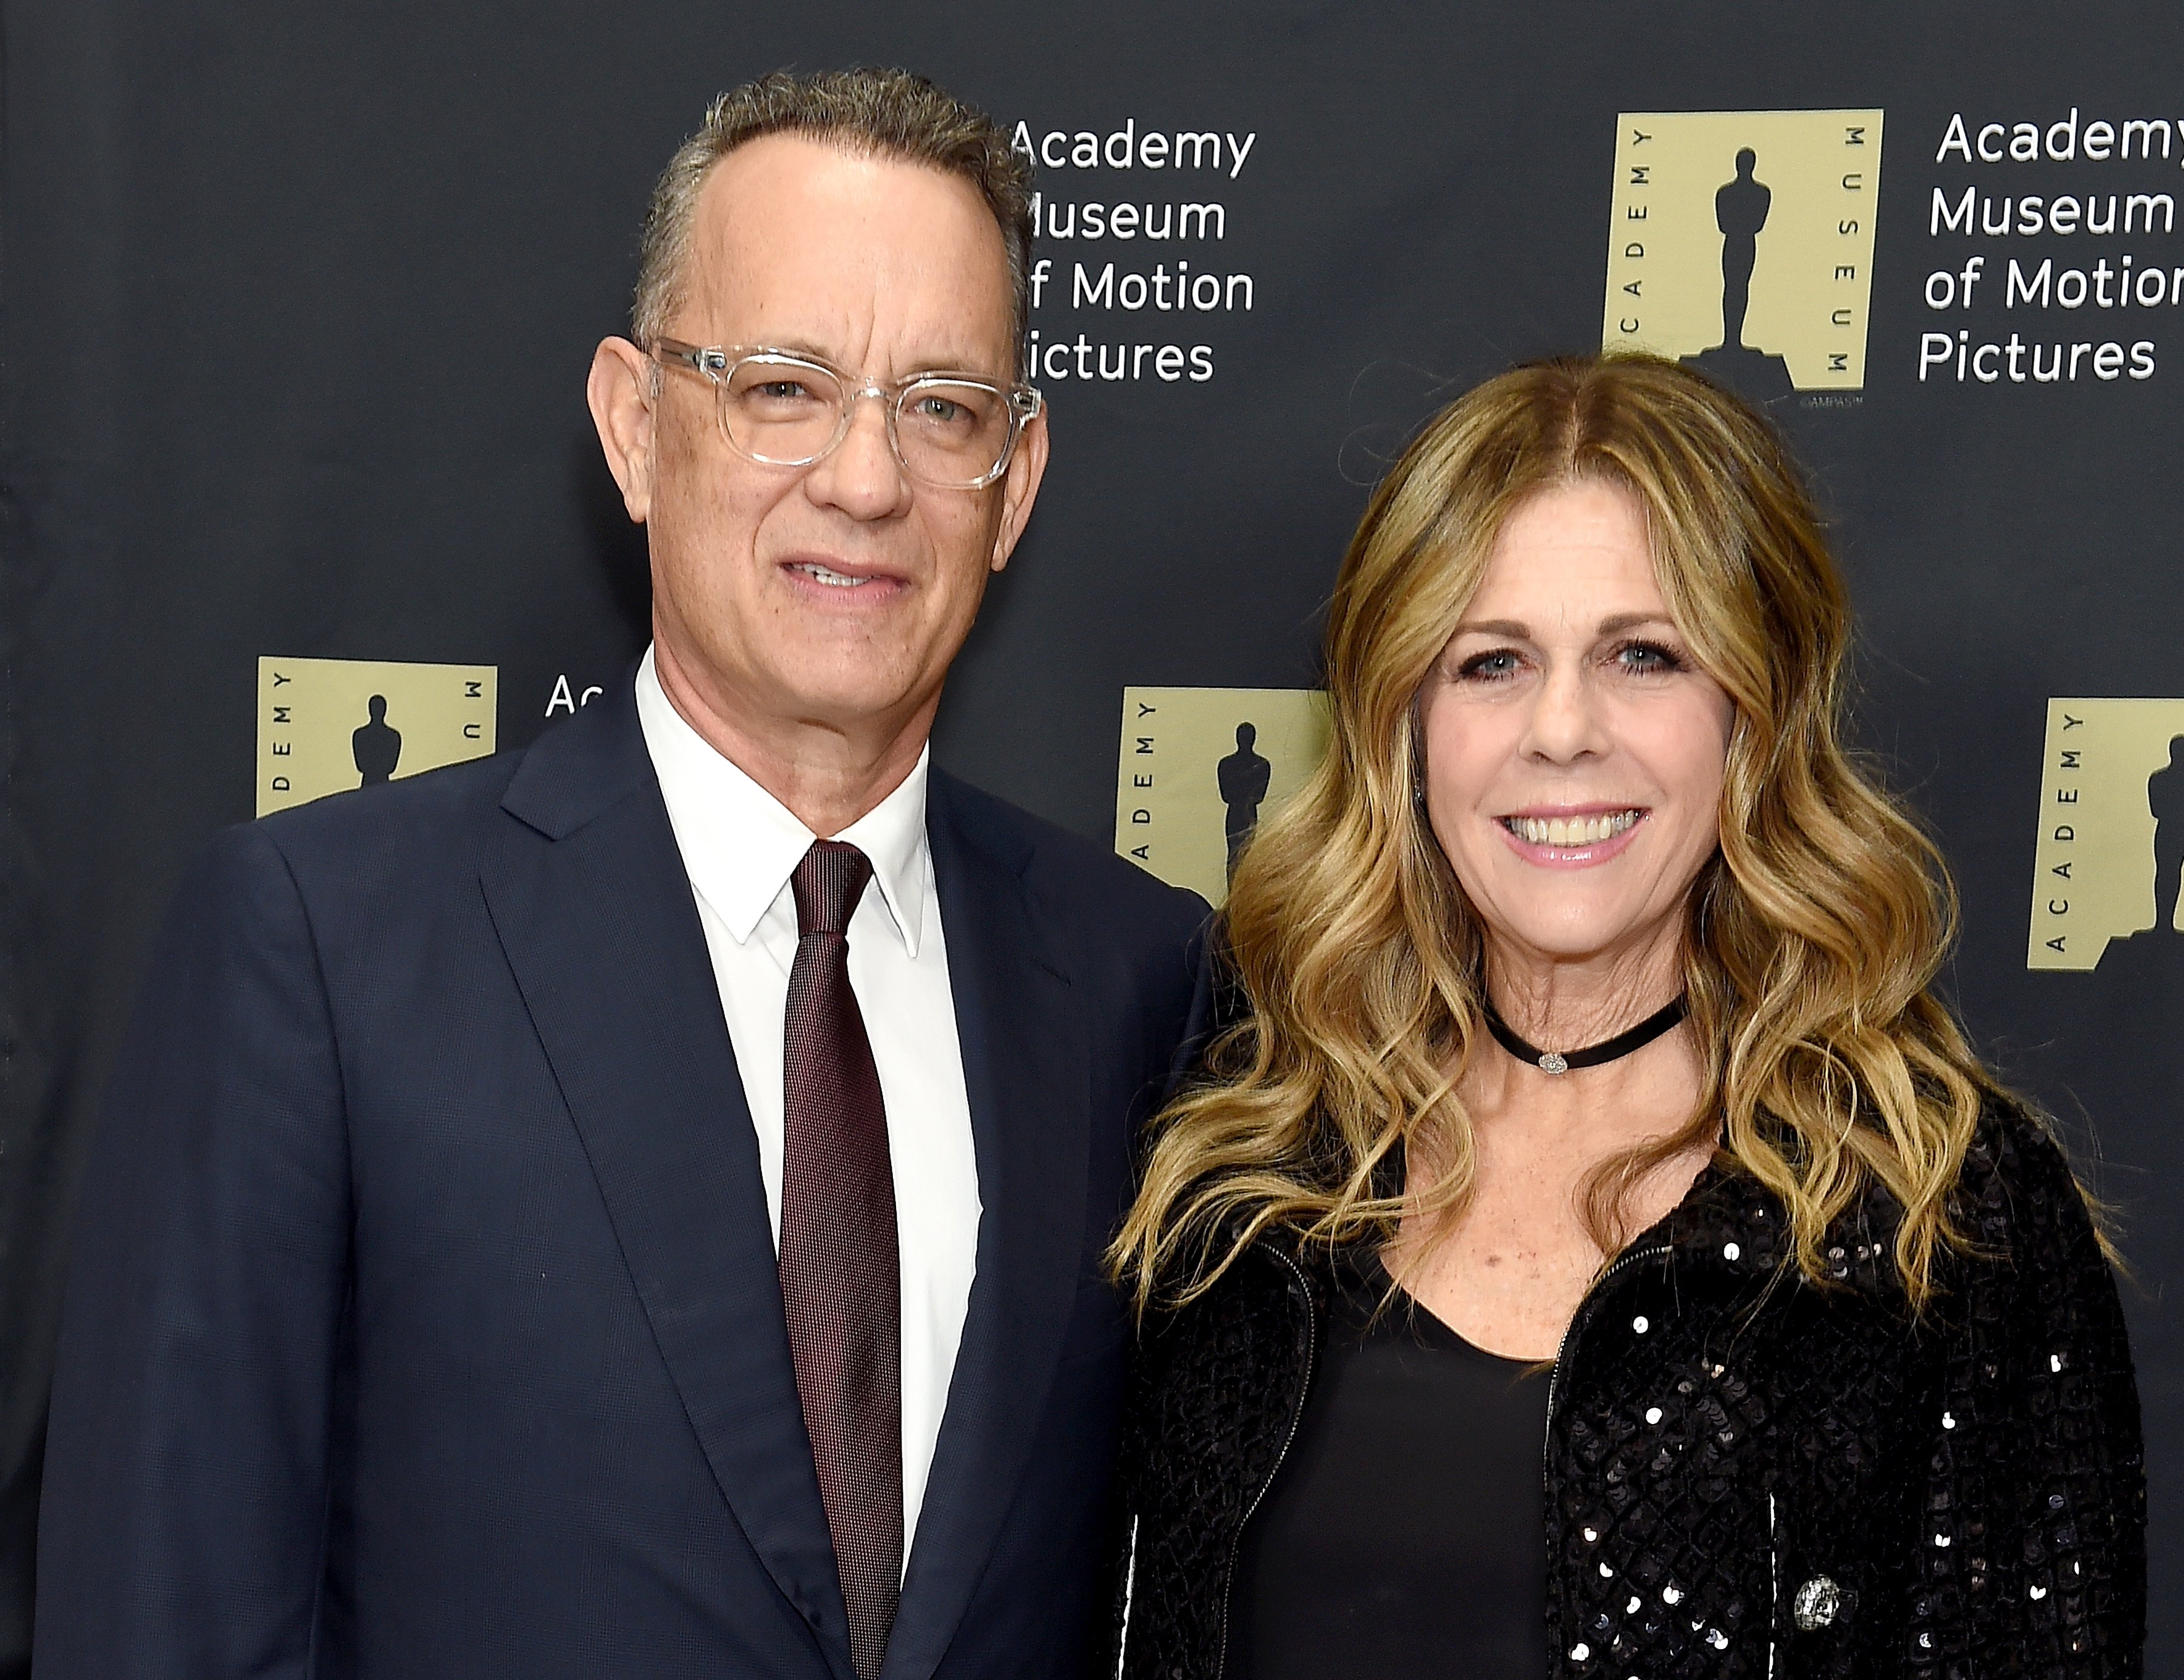 Tom Hanks and Rita Wilson at the unveiling of the Fully Restored Saban Building at Petersen Automotive Museum in Los Angeles, California | Photo: Gregg DeGuire/Getty Images